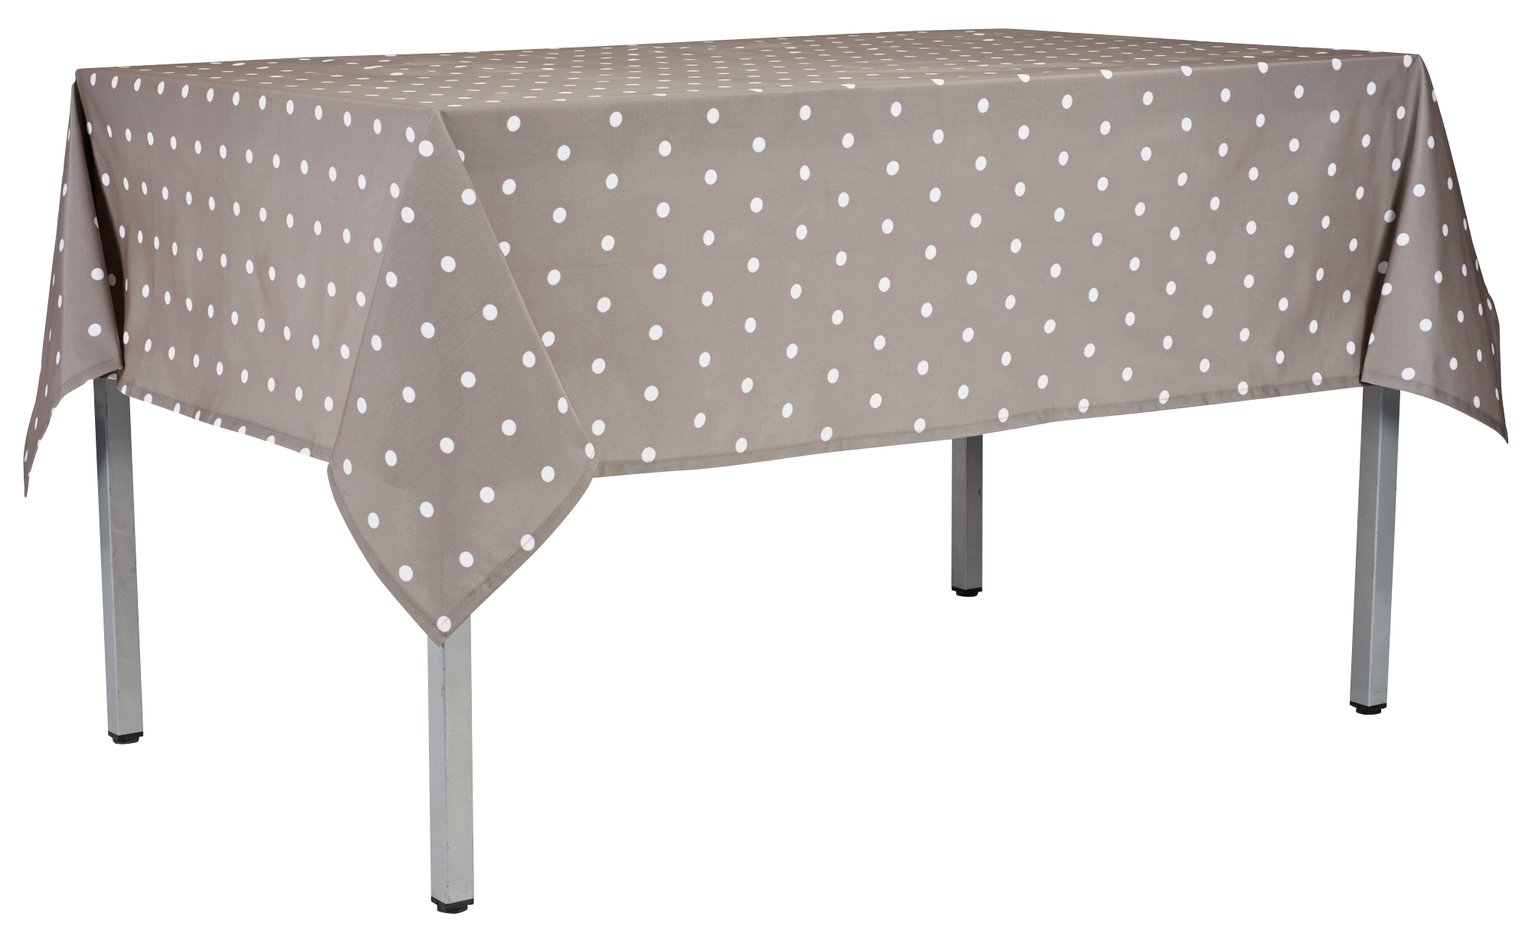 Argos Home Spotted PVC Tablecloth - Grey